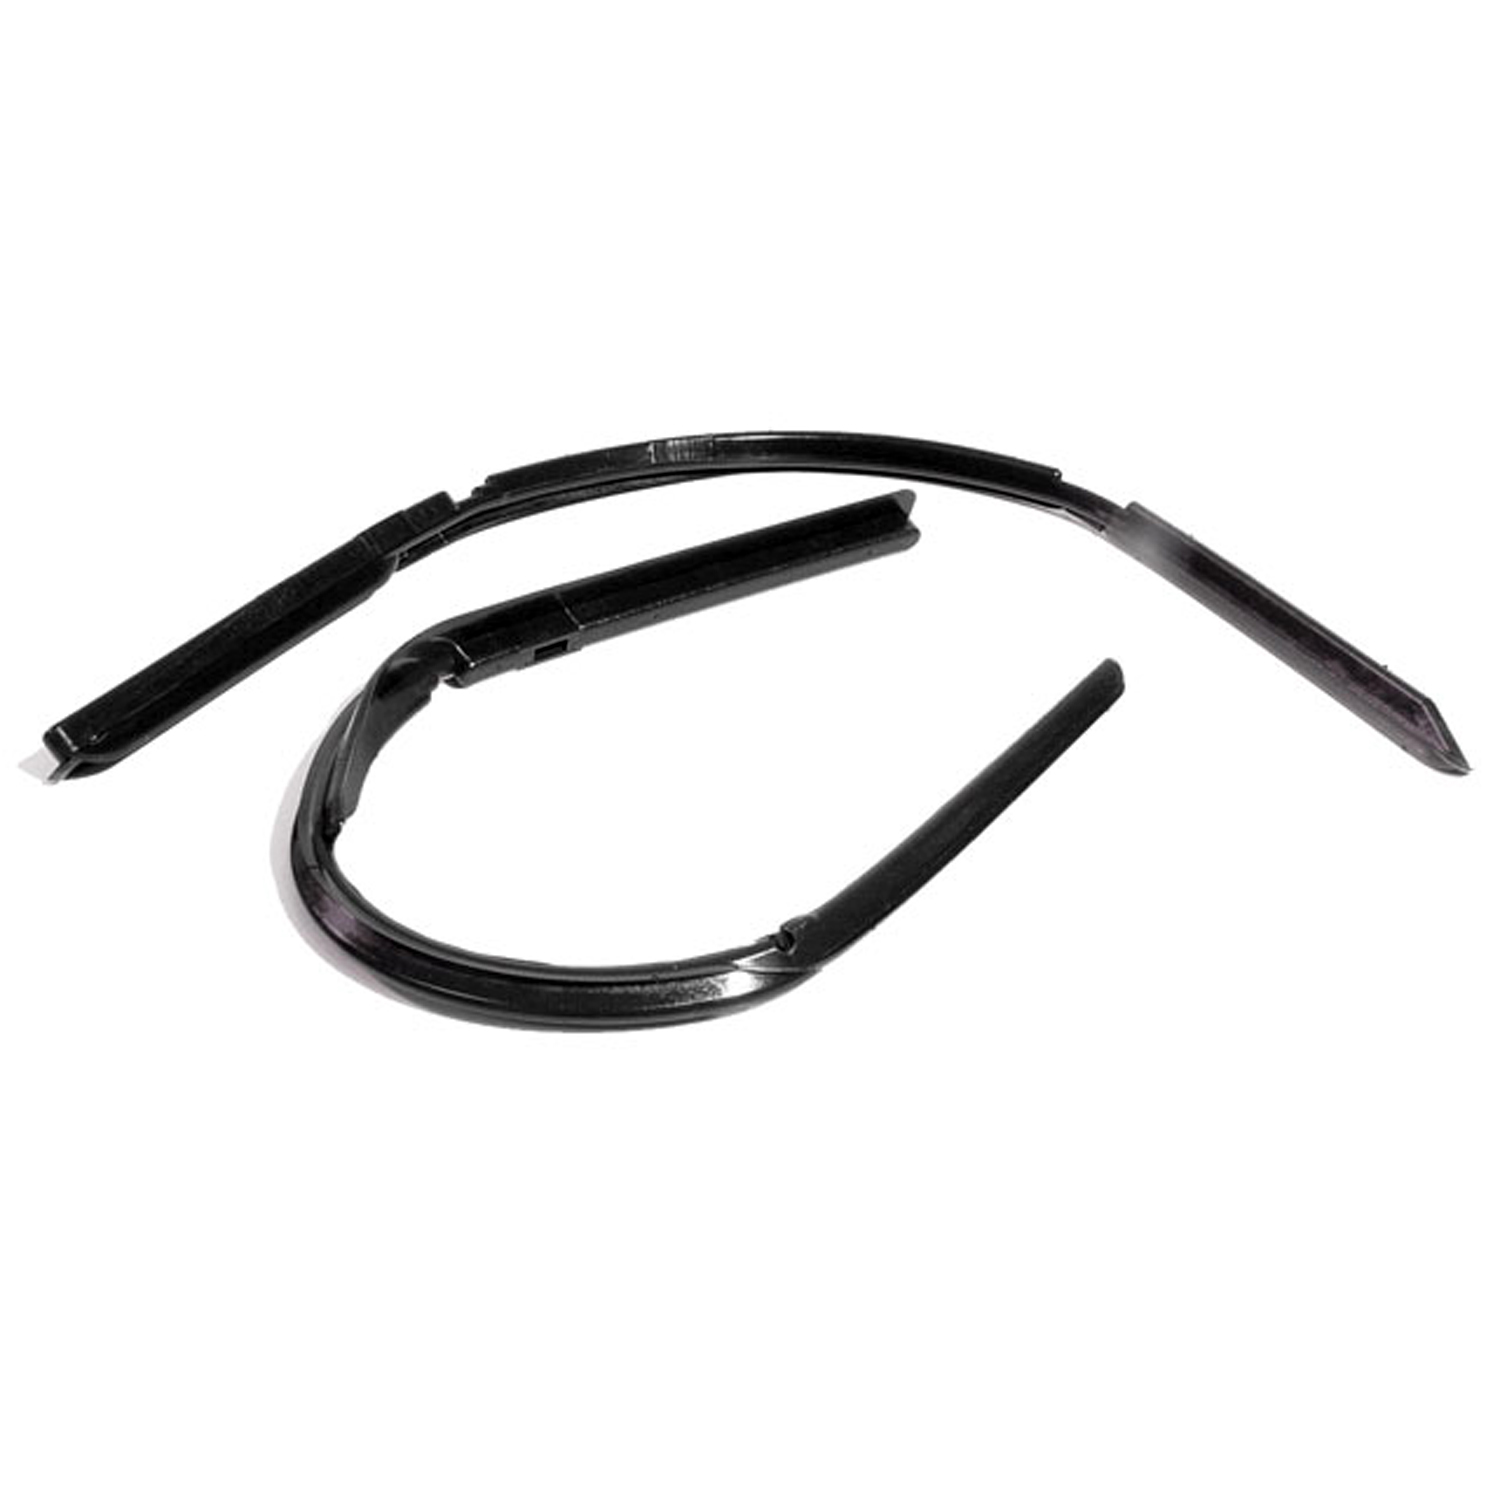 1946 Chevrolet Stylemaster Series Front Vent Window Seals, for Convertibles.  Pair RL-WR 7313